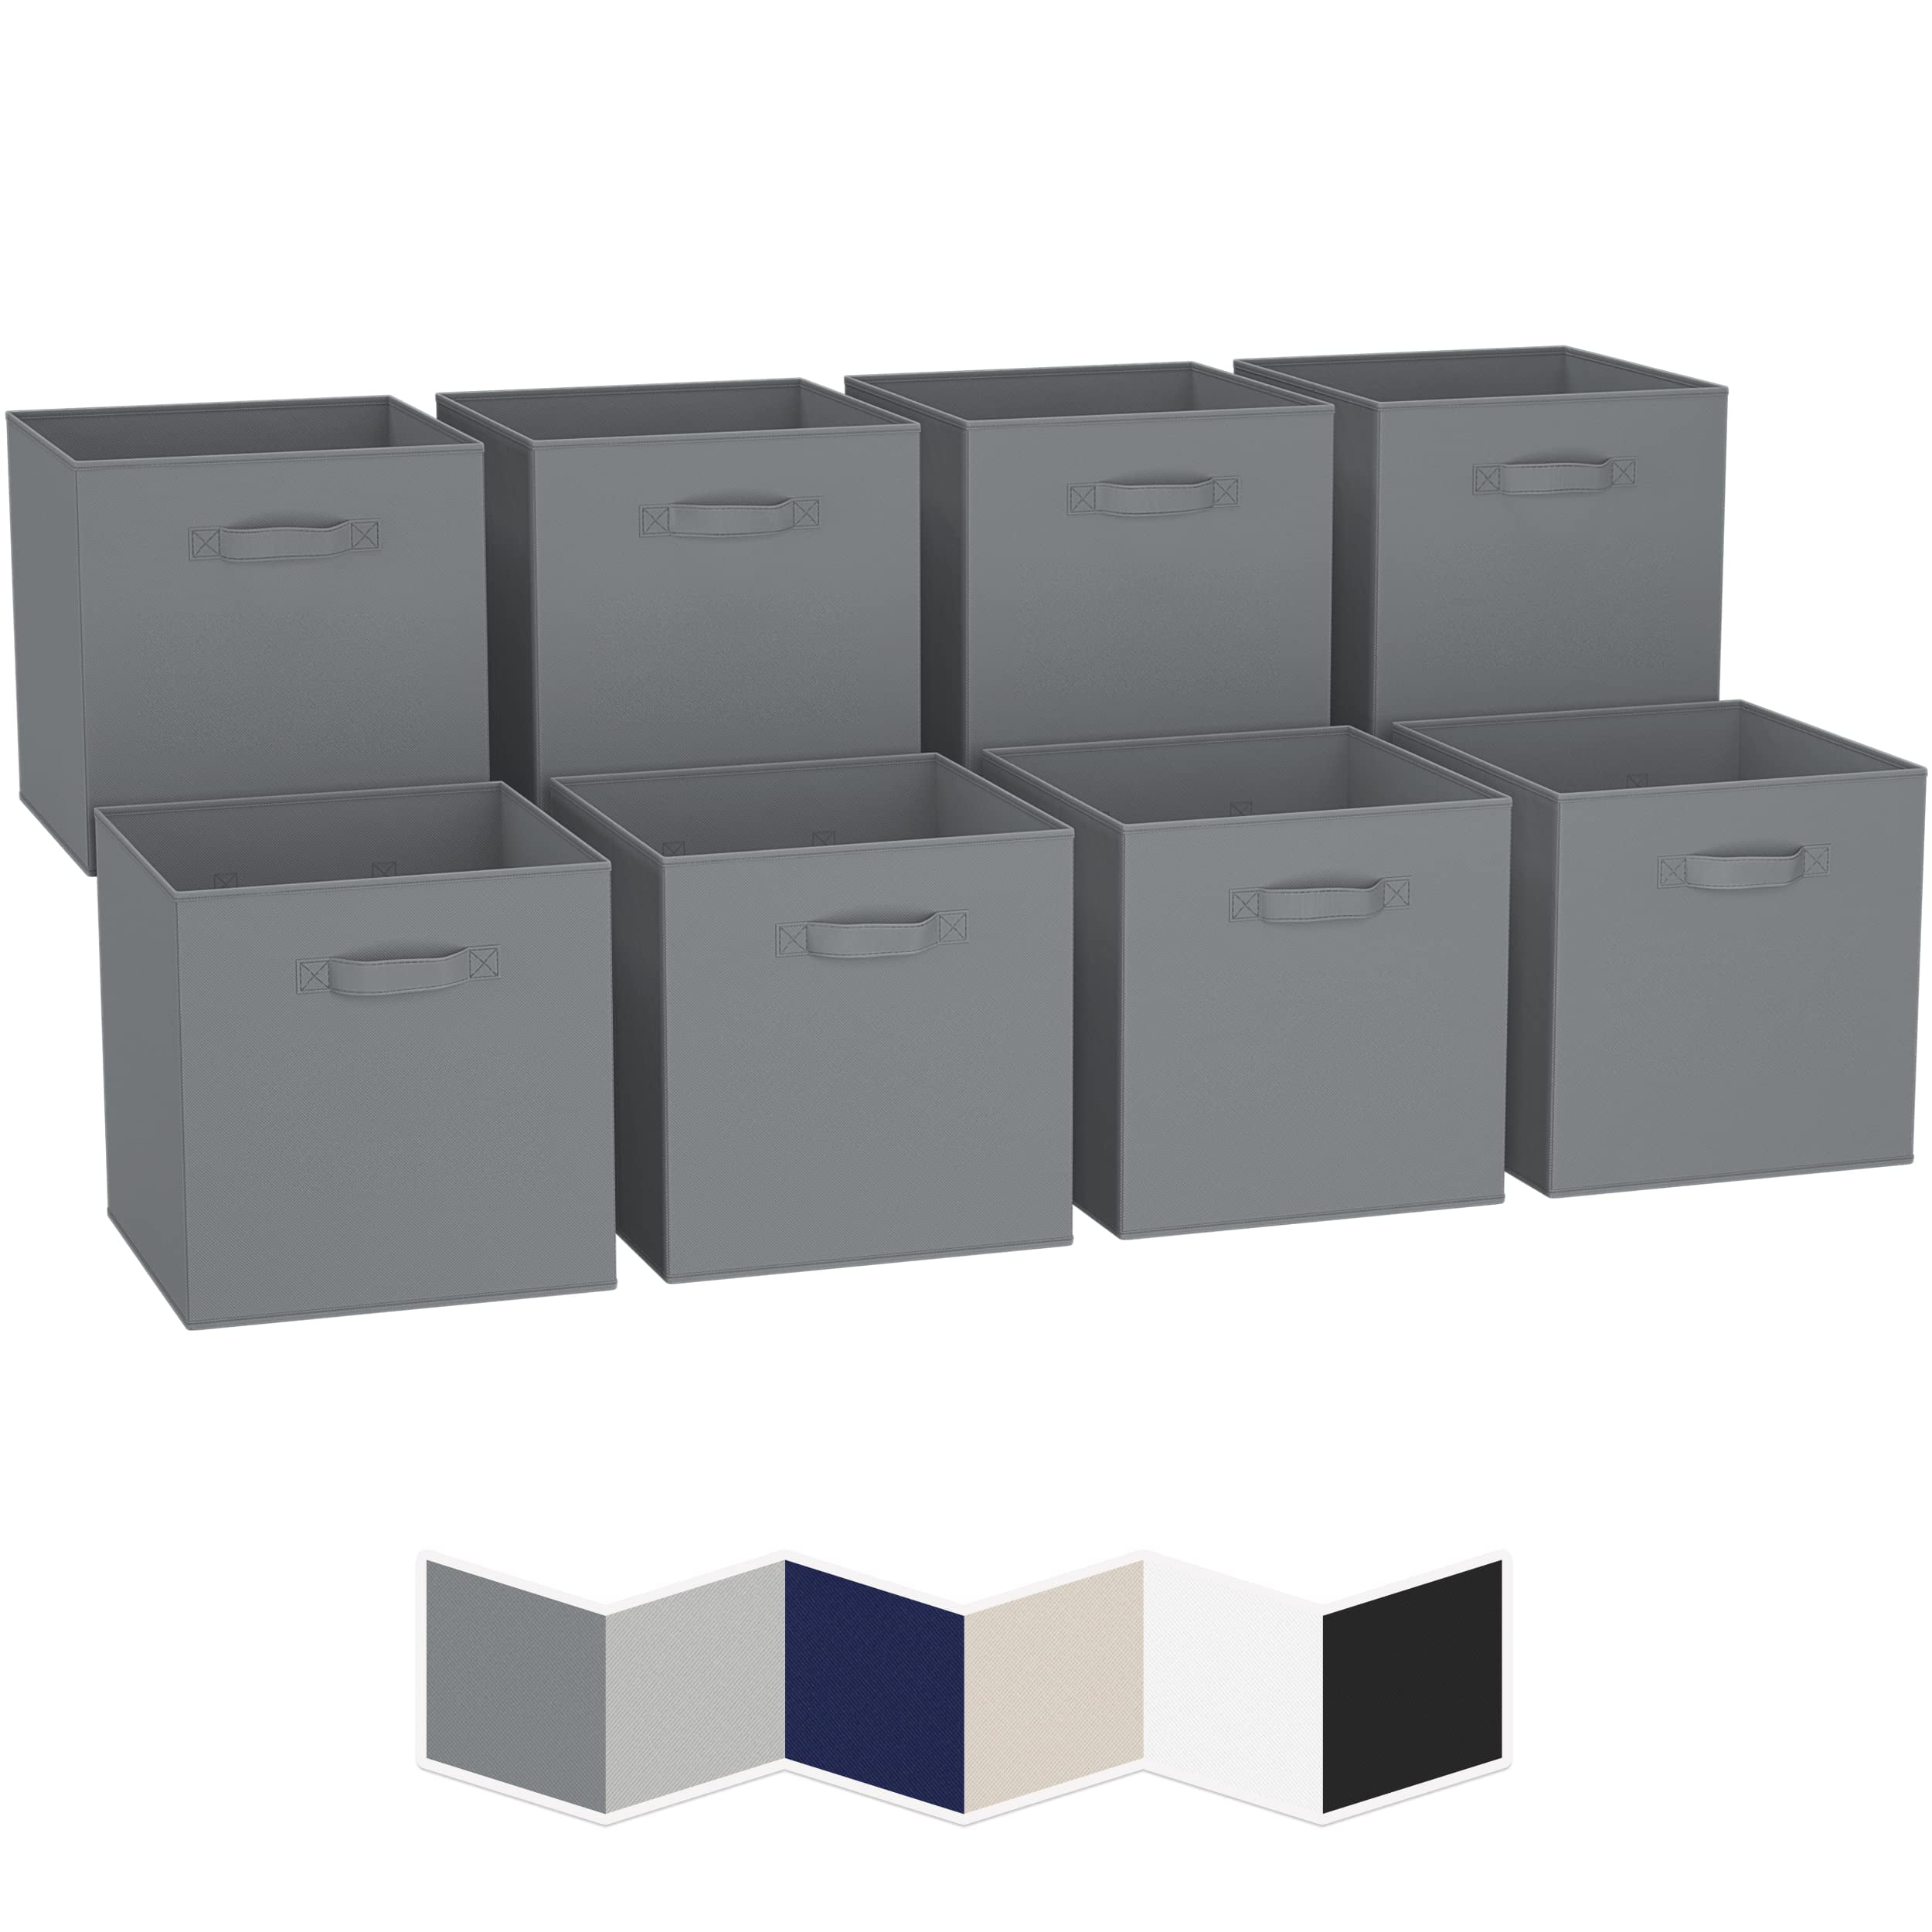 Features Dual Handles Set of 6 Storage Bins NEATERIZE 13x13x13 Large Storage Cubes Fabric Storage Box for Home and Office Foldable Closet Organizers and Storage Cube Storage Bins Grey